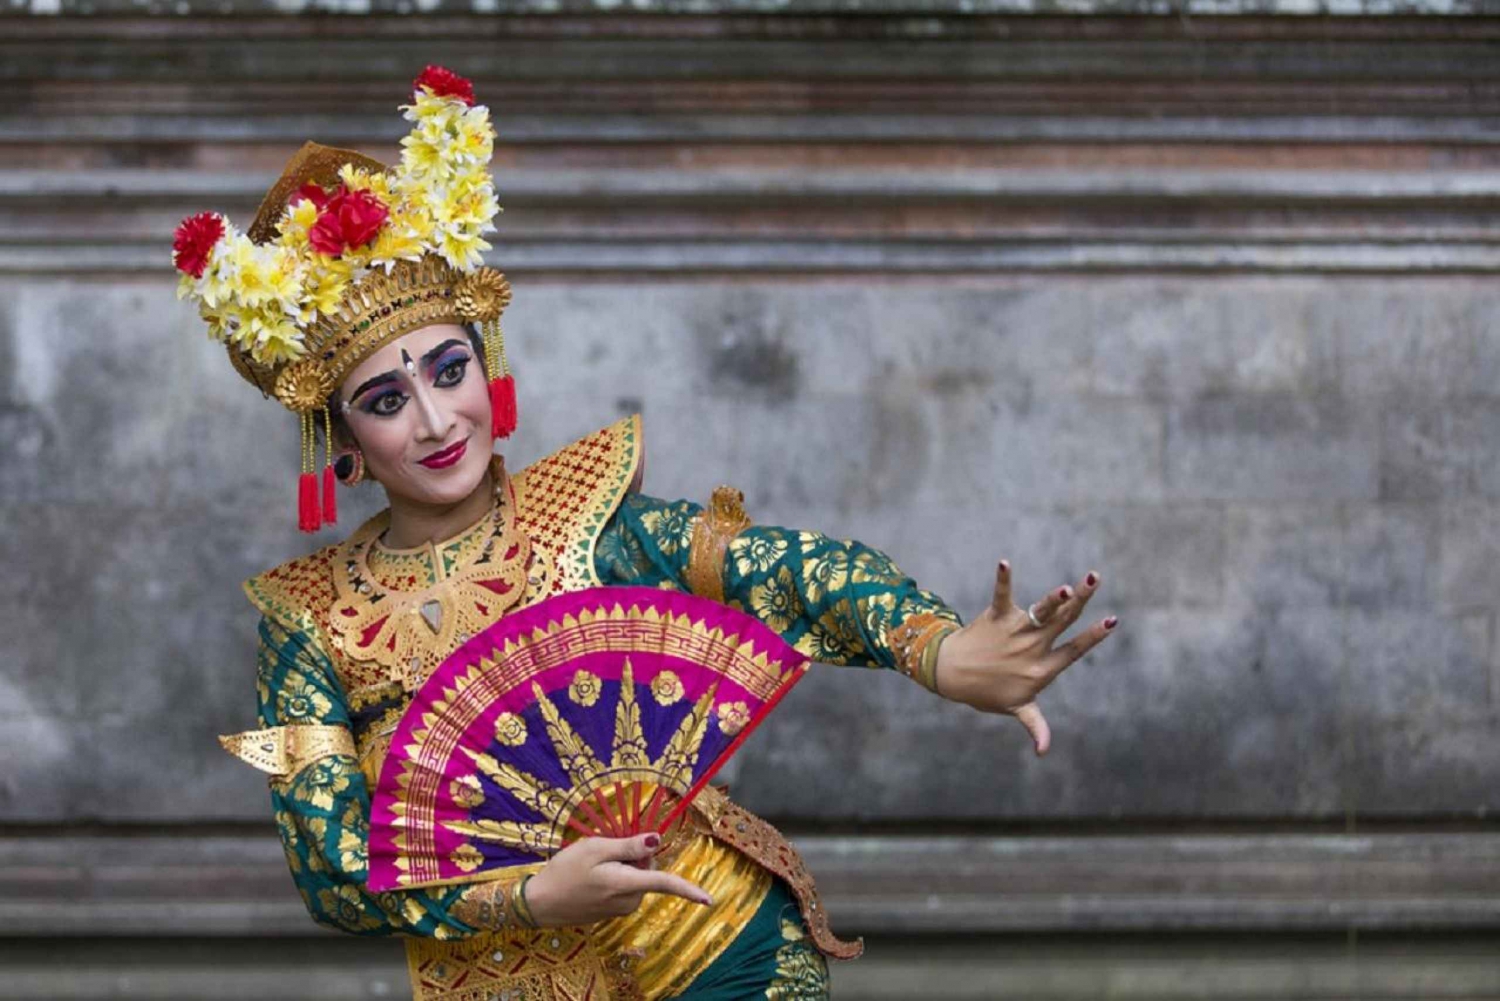 Bali: Ubud Full-Day Sightseeing Tour with Legong Dance Show